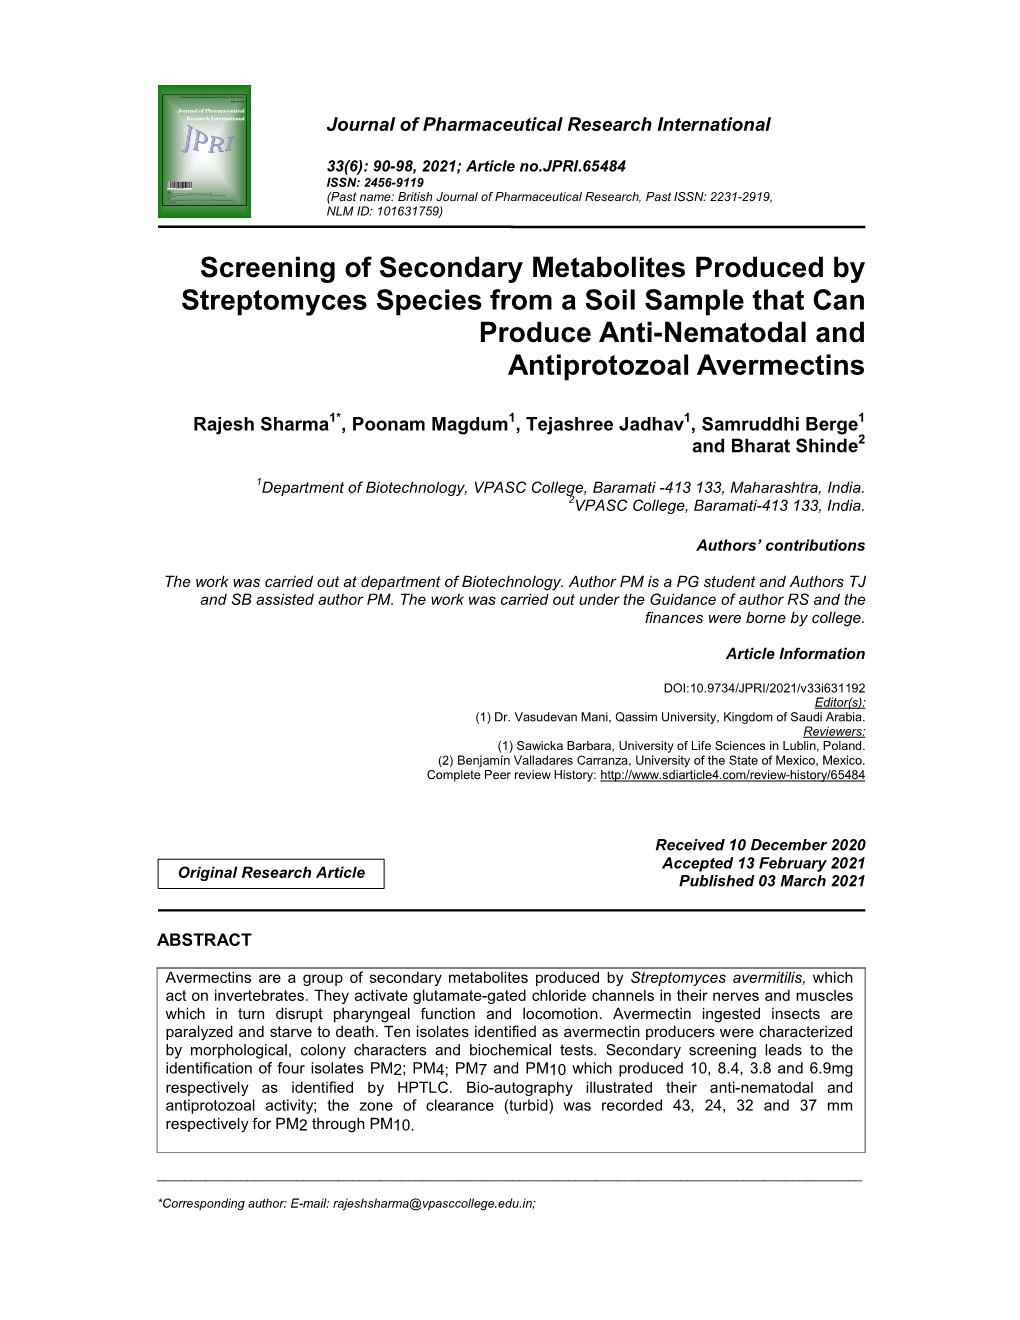 Screening of Secondary Metabolites Produced by Streptomyces Species from a Soil Sample That Can Produce Anti-Nematodal and Antiprotozoal Avermectins